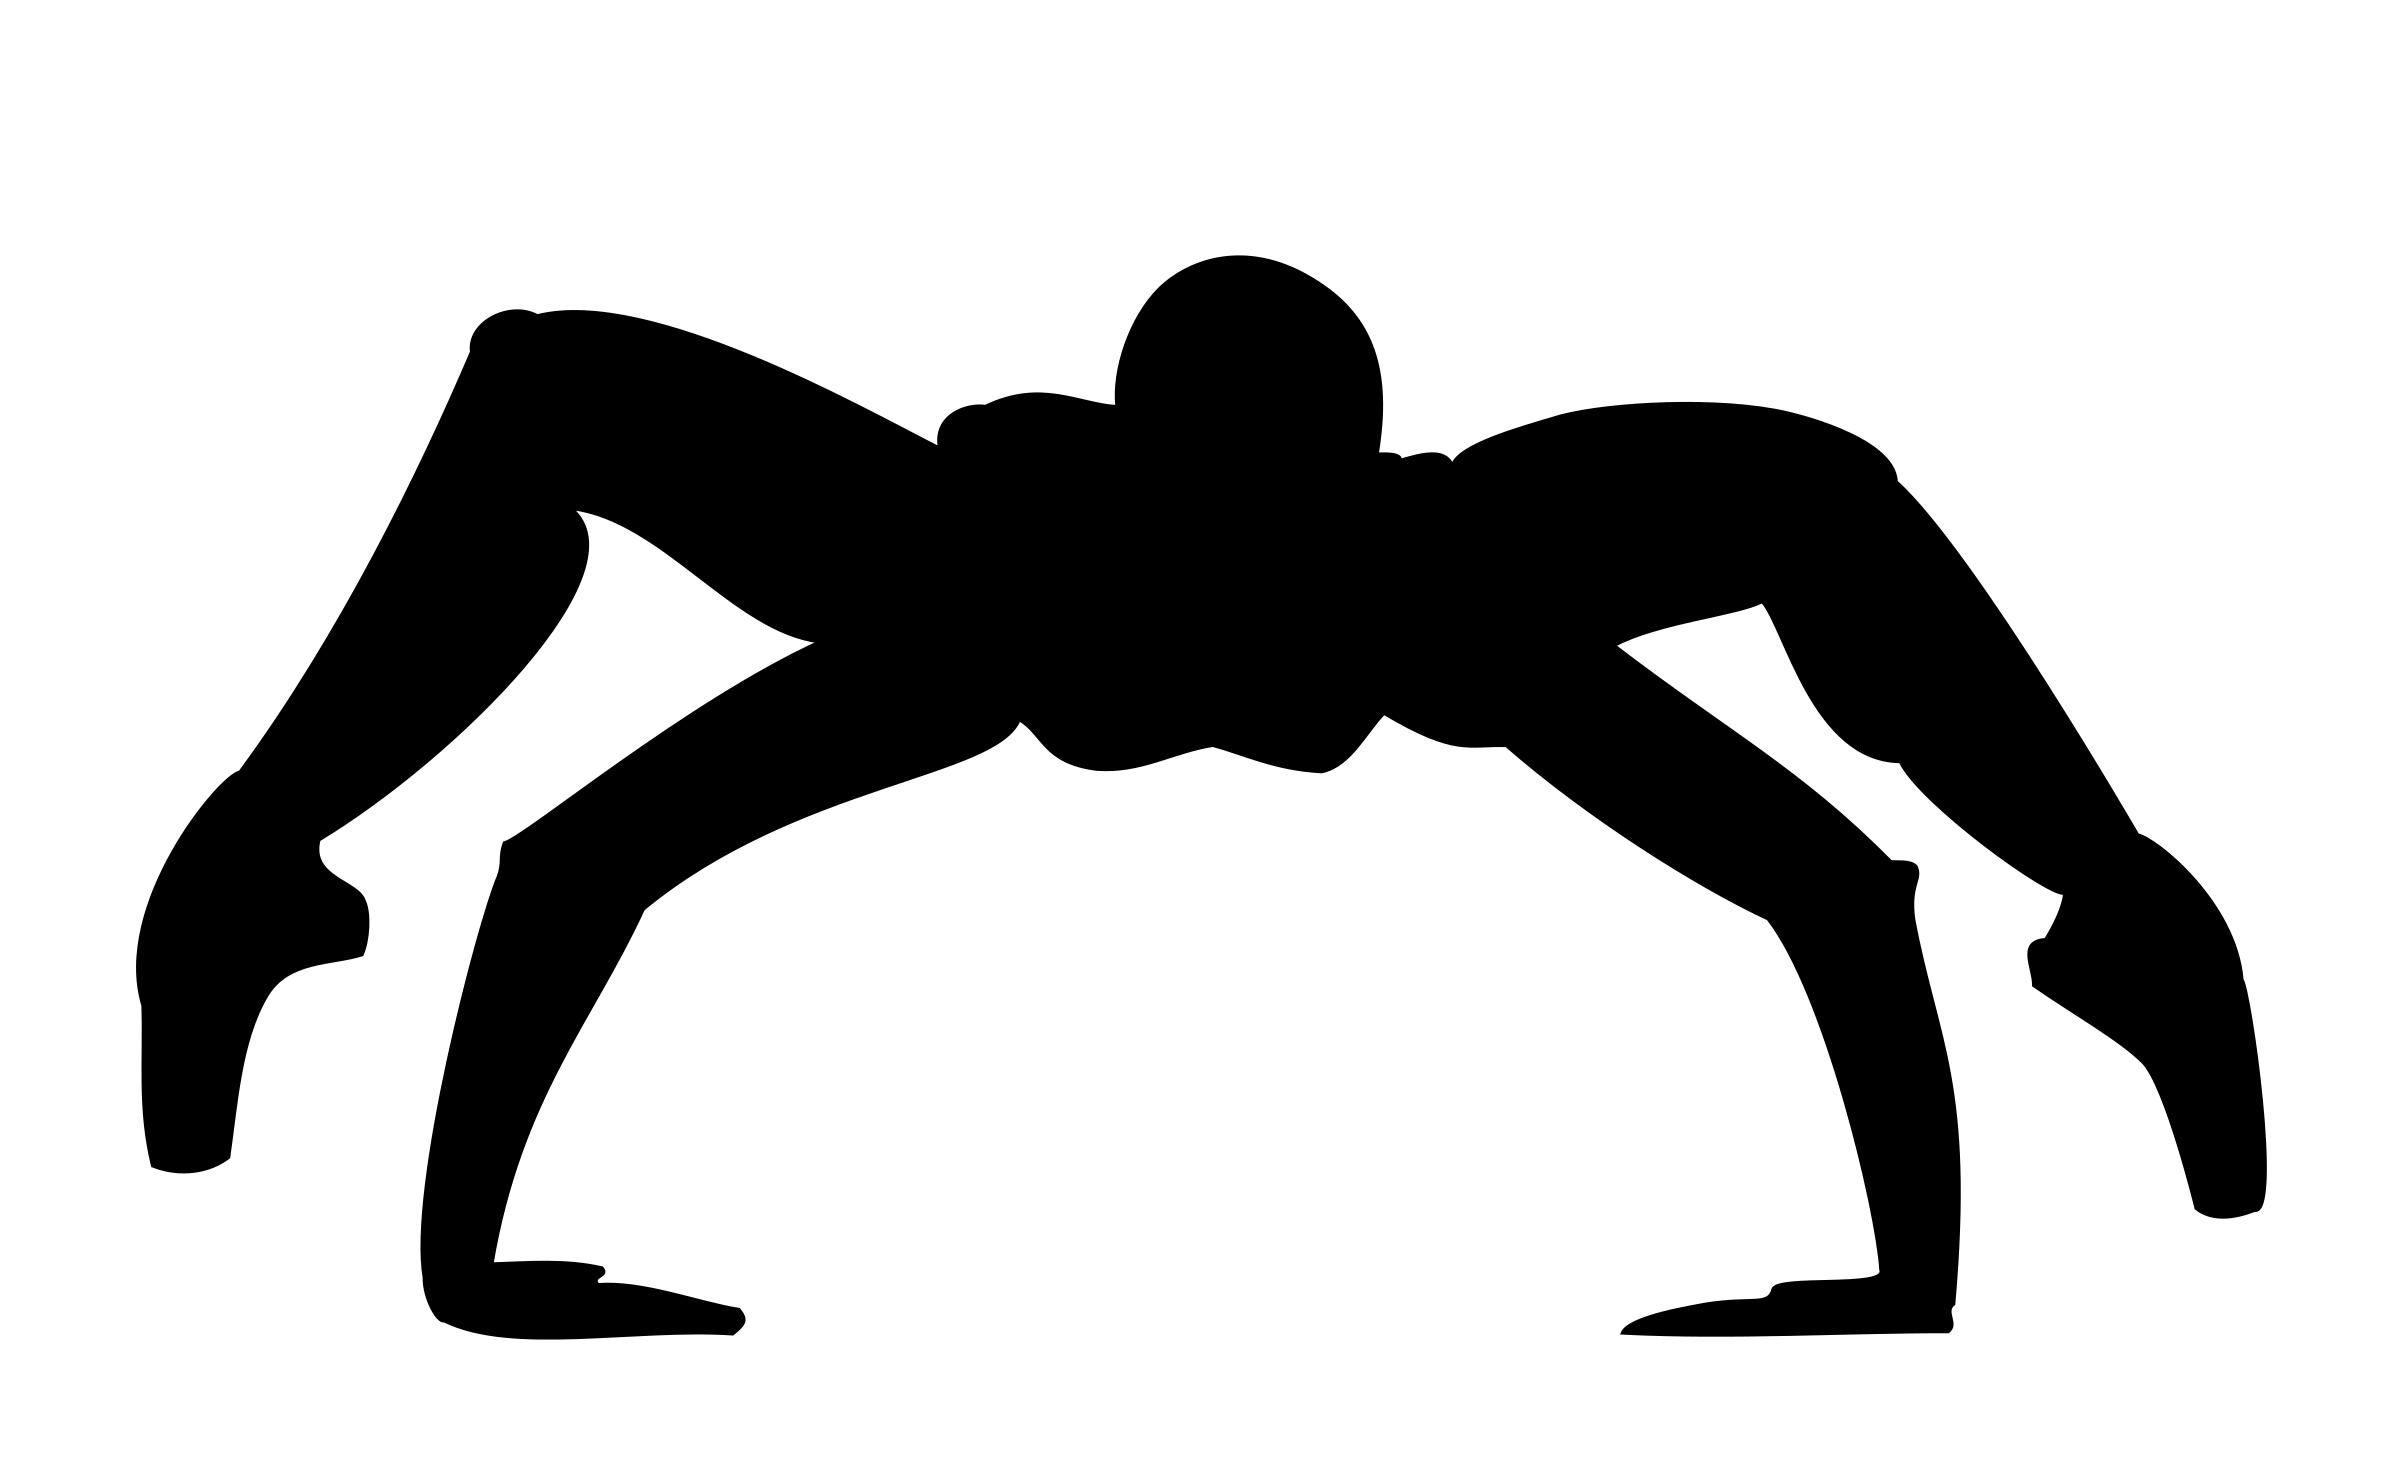 Spider woman silhouette png